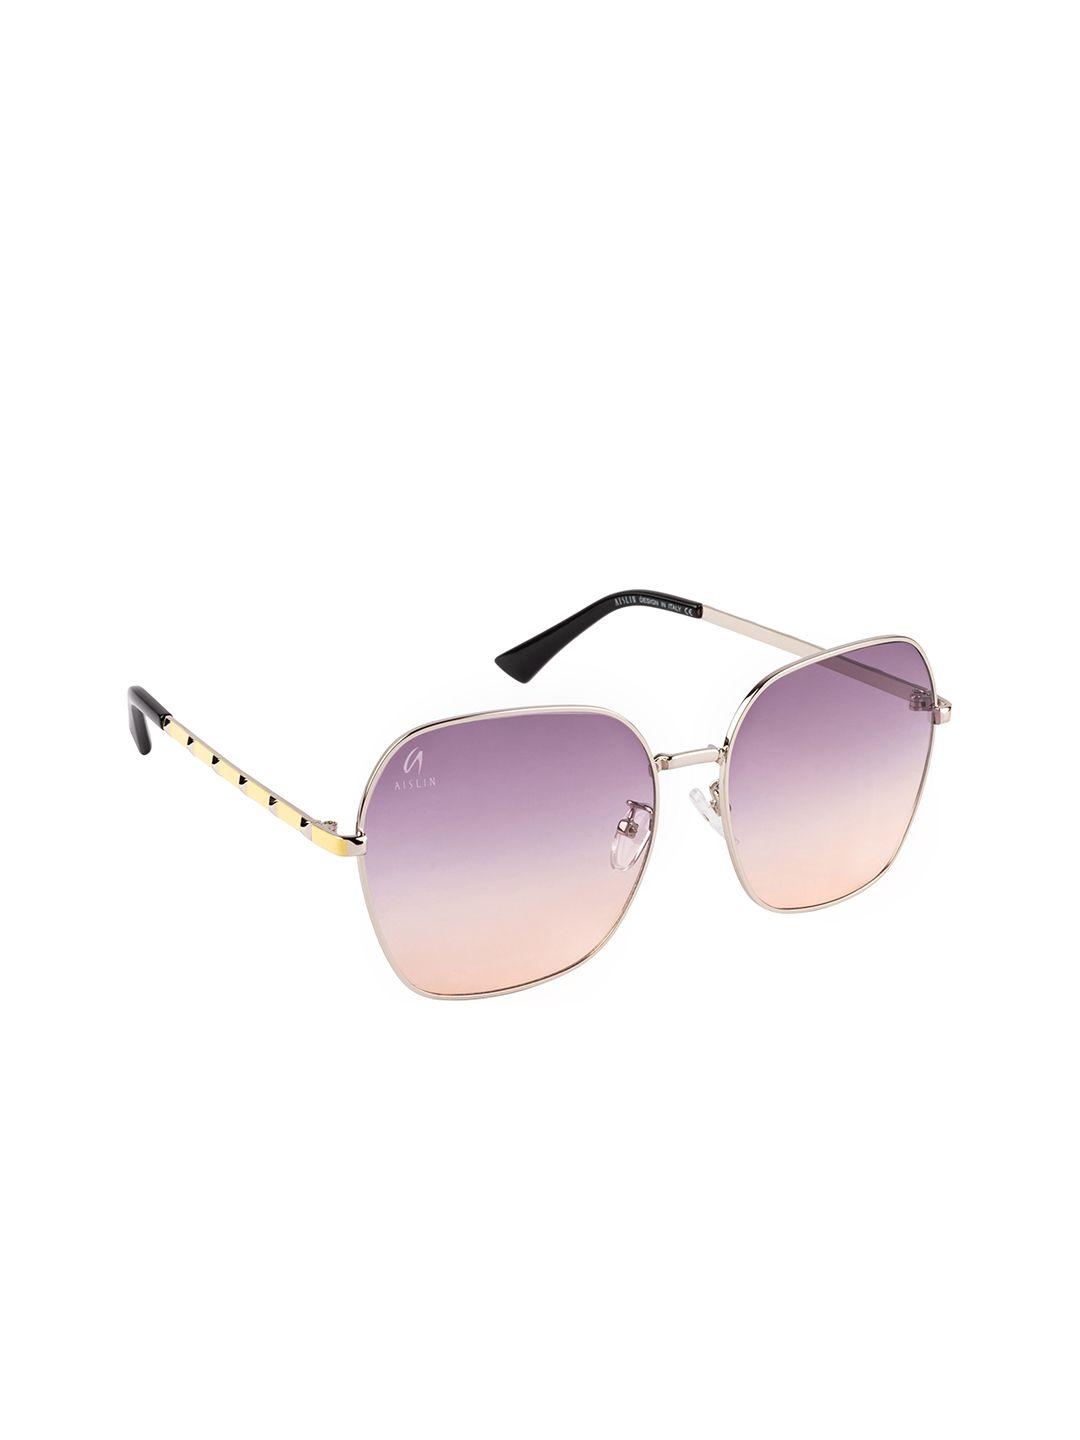 aislin unisex purple lens & silver-toned oversized sunglasses with uv protected lens